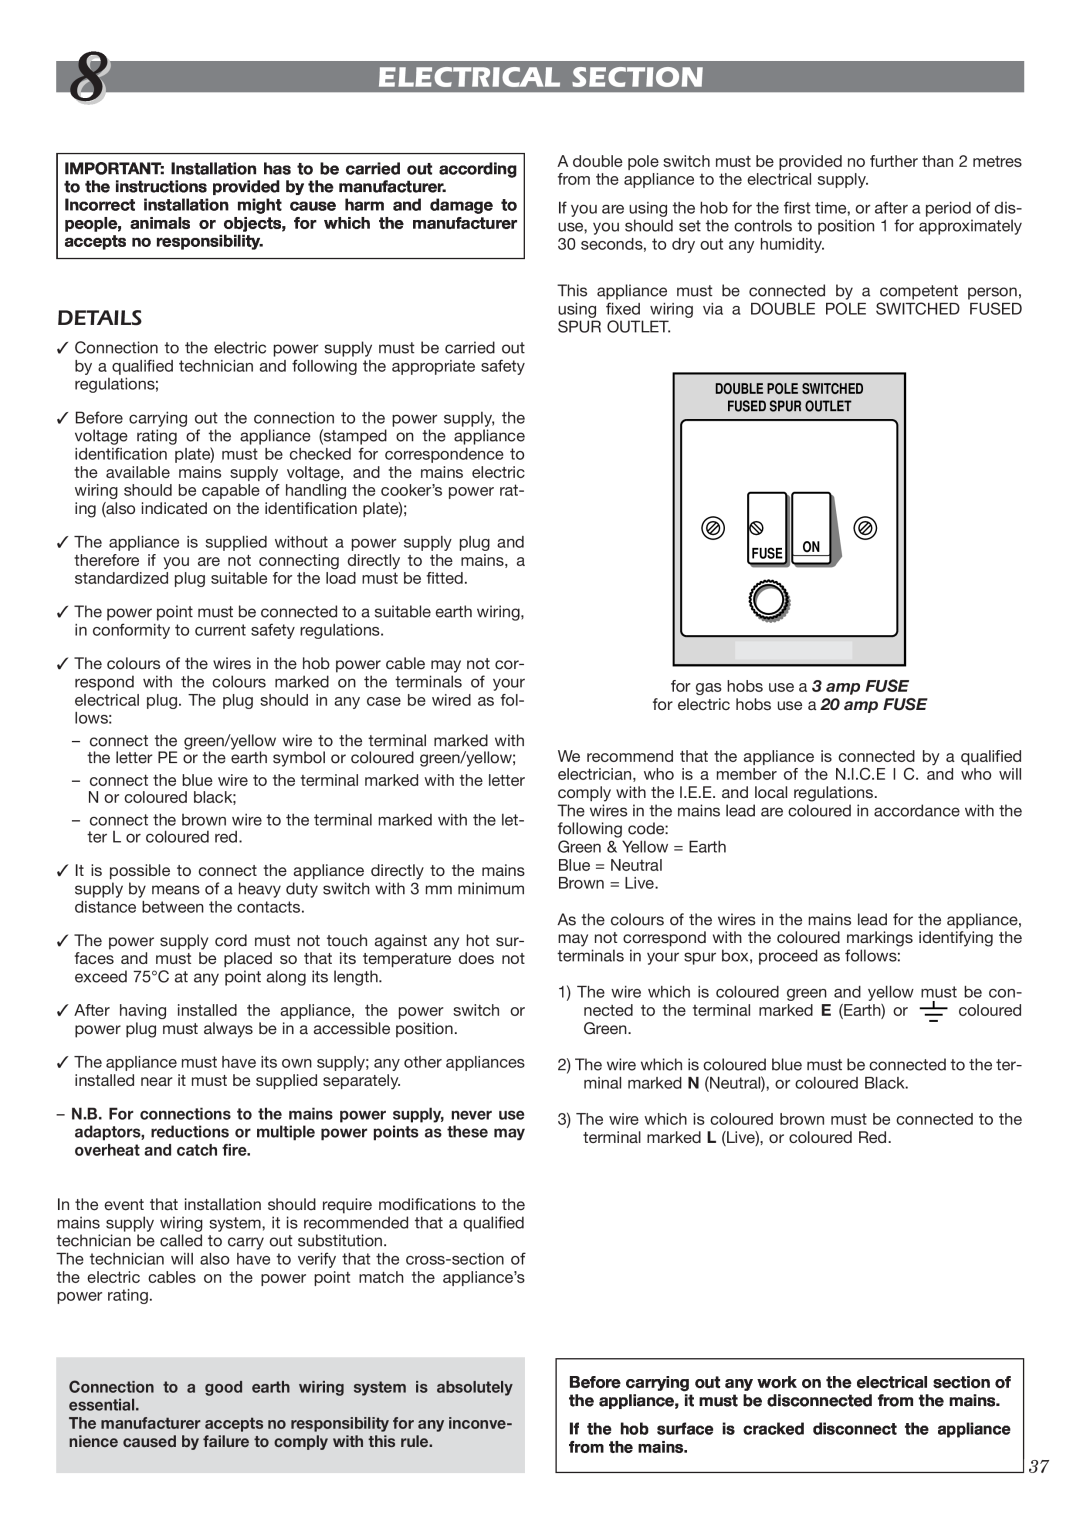 CDA HCC360 manual Electrical Section, Details 